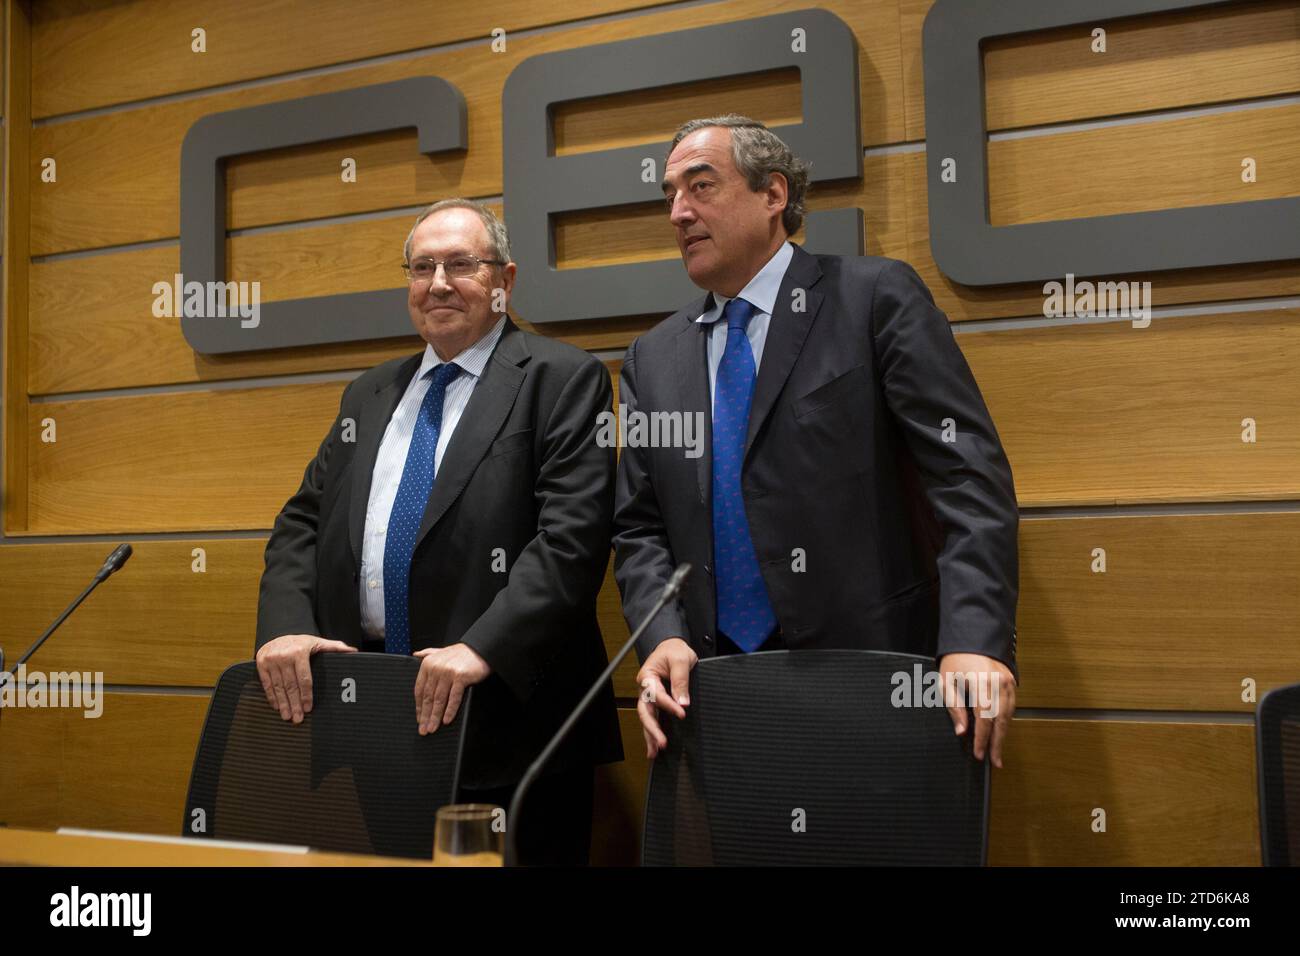 Madrid, 07/07/2015. The president of the Ceoe Joan Rosell and José Luis Bonet at a Press conference. Photo: Isabel Permuy Archdc. Credit: Album / Archivo ABC / Isabel B Permuy Stock Photo